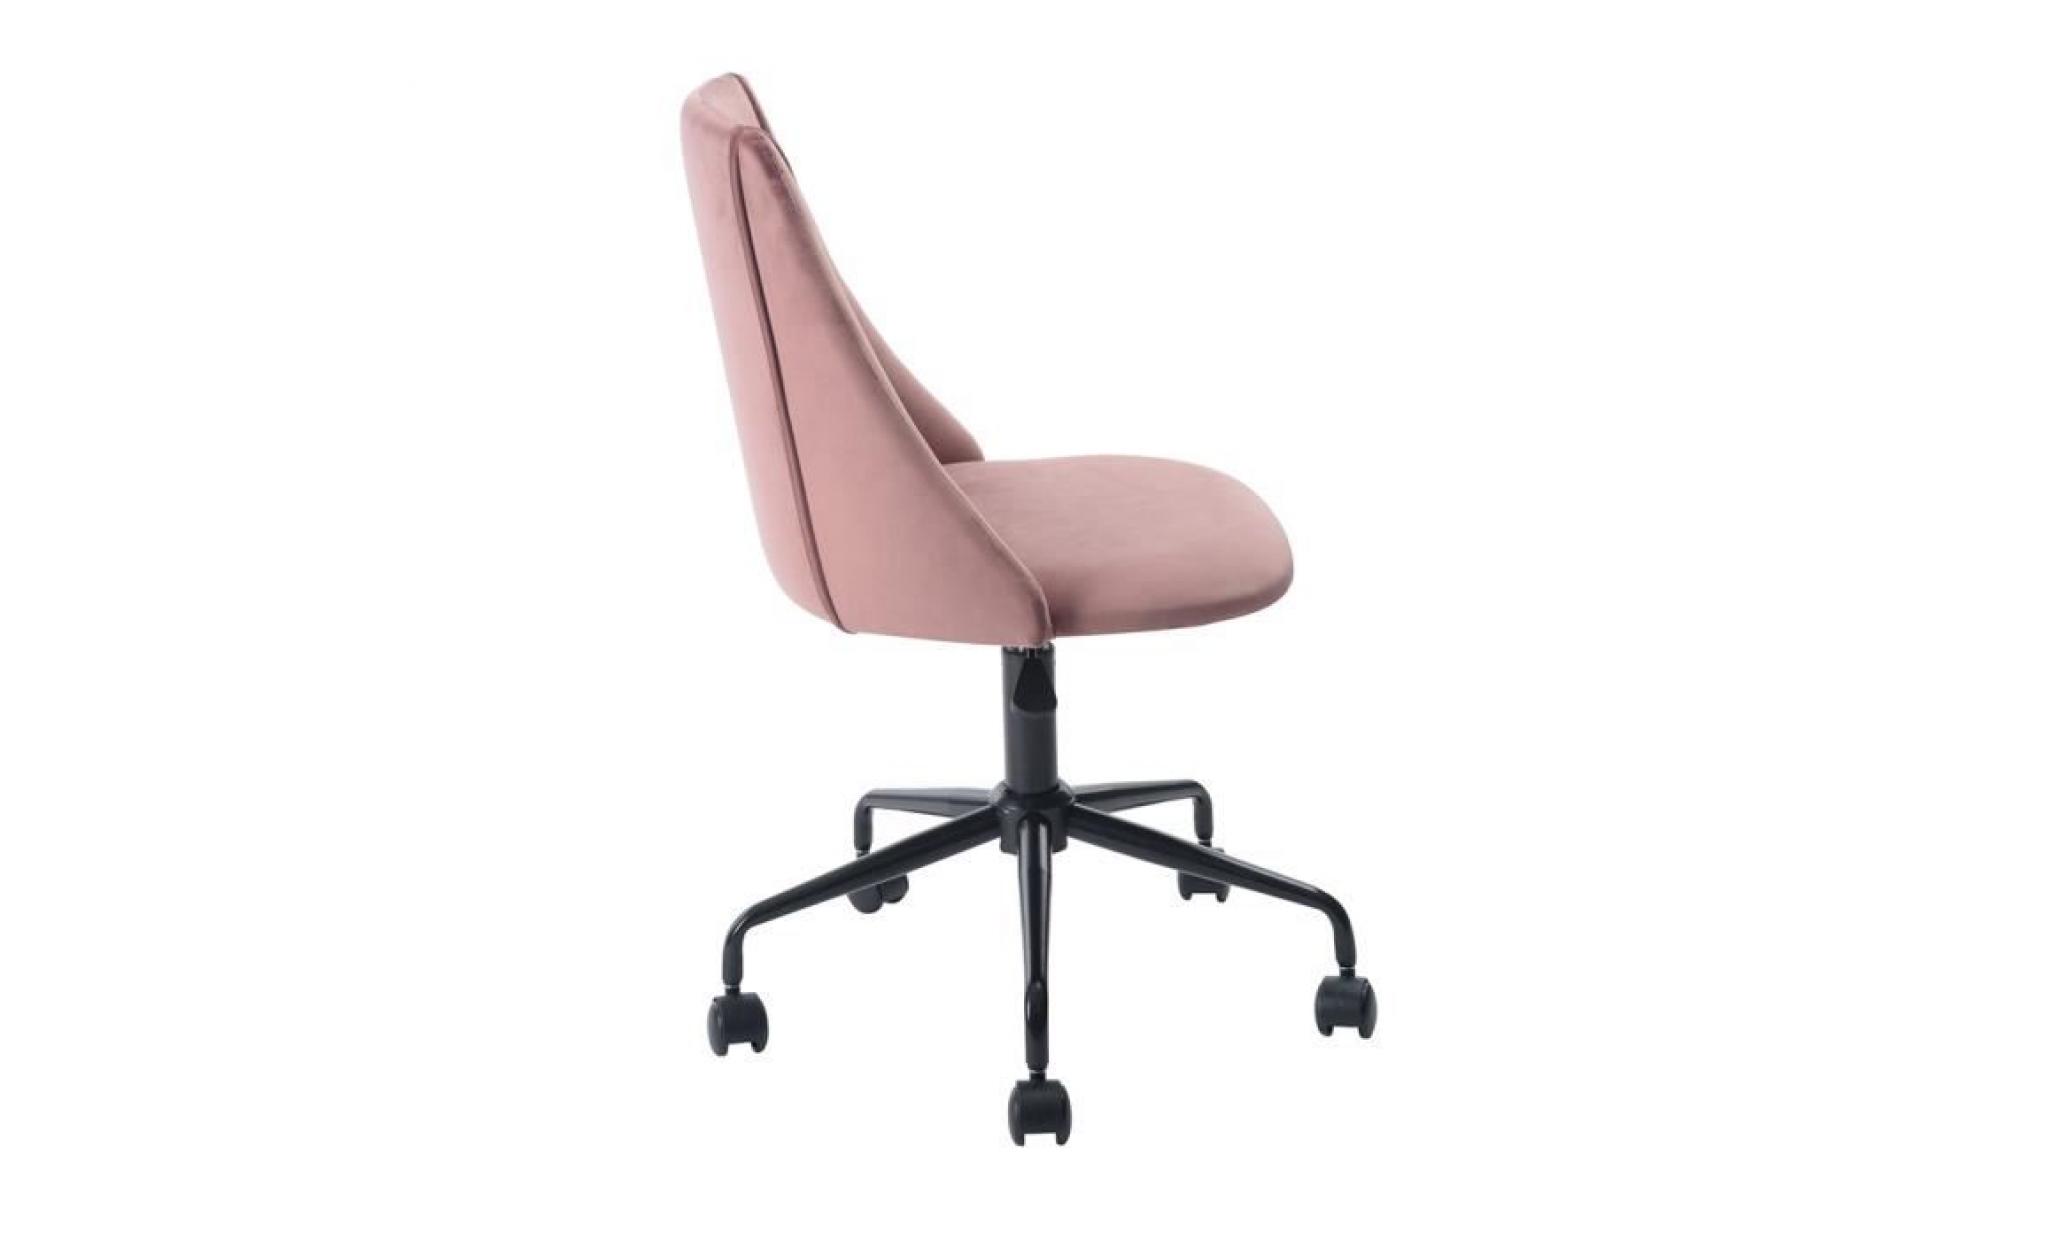 furnish 1 velvet office chair padded velvet foam seat with rotation height and casters,rose pas cher